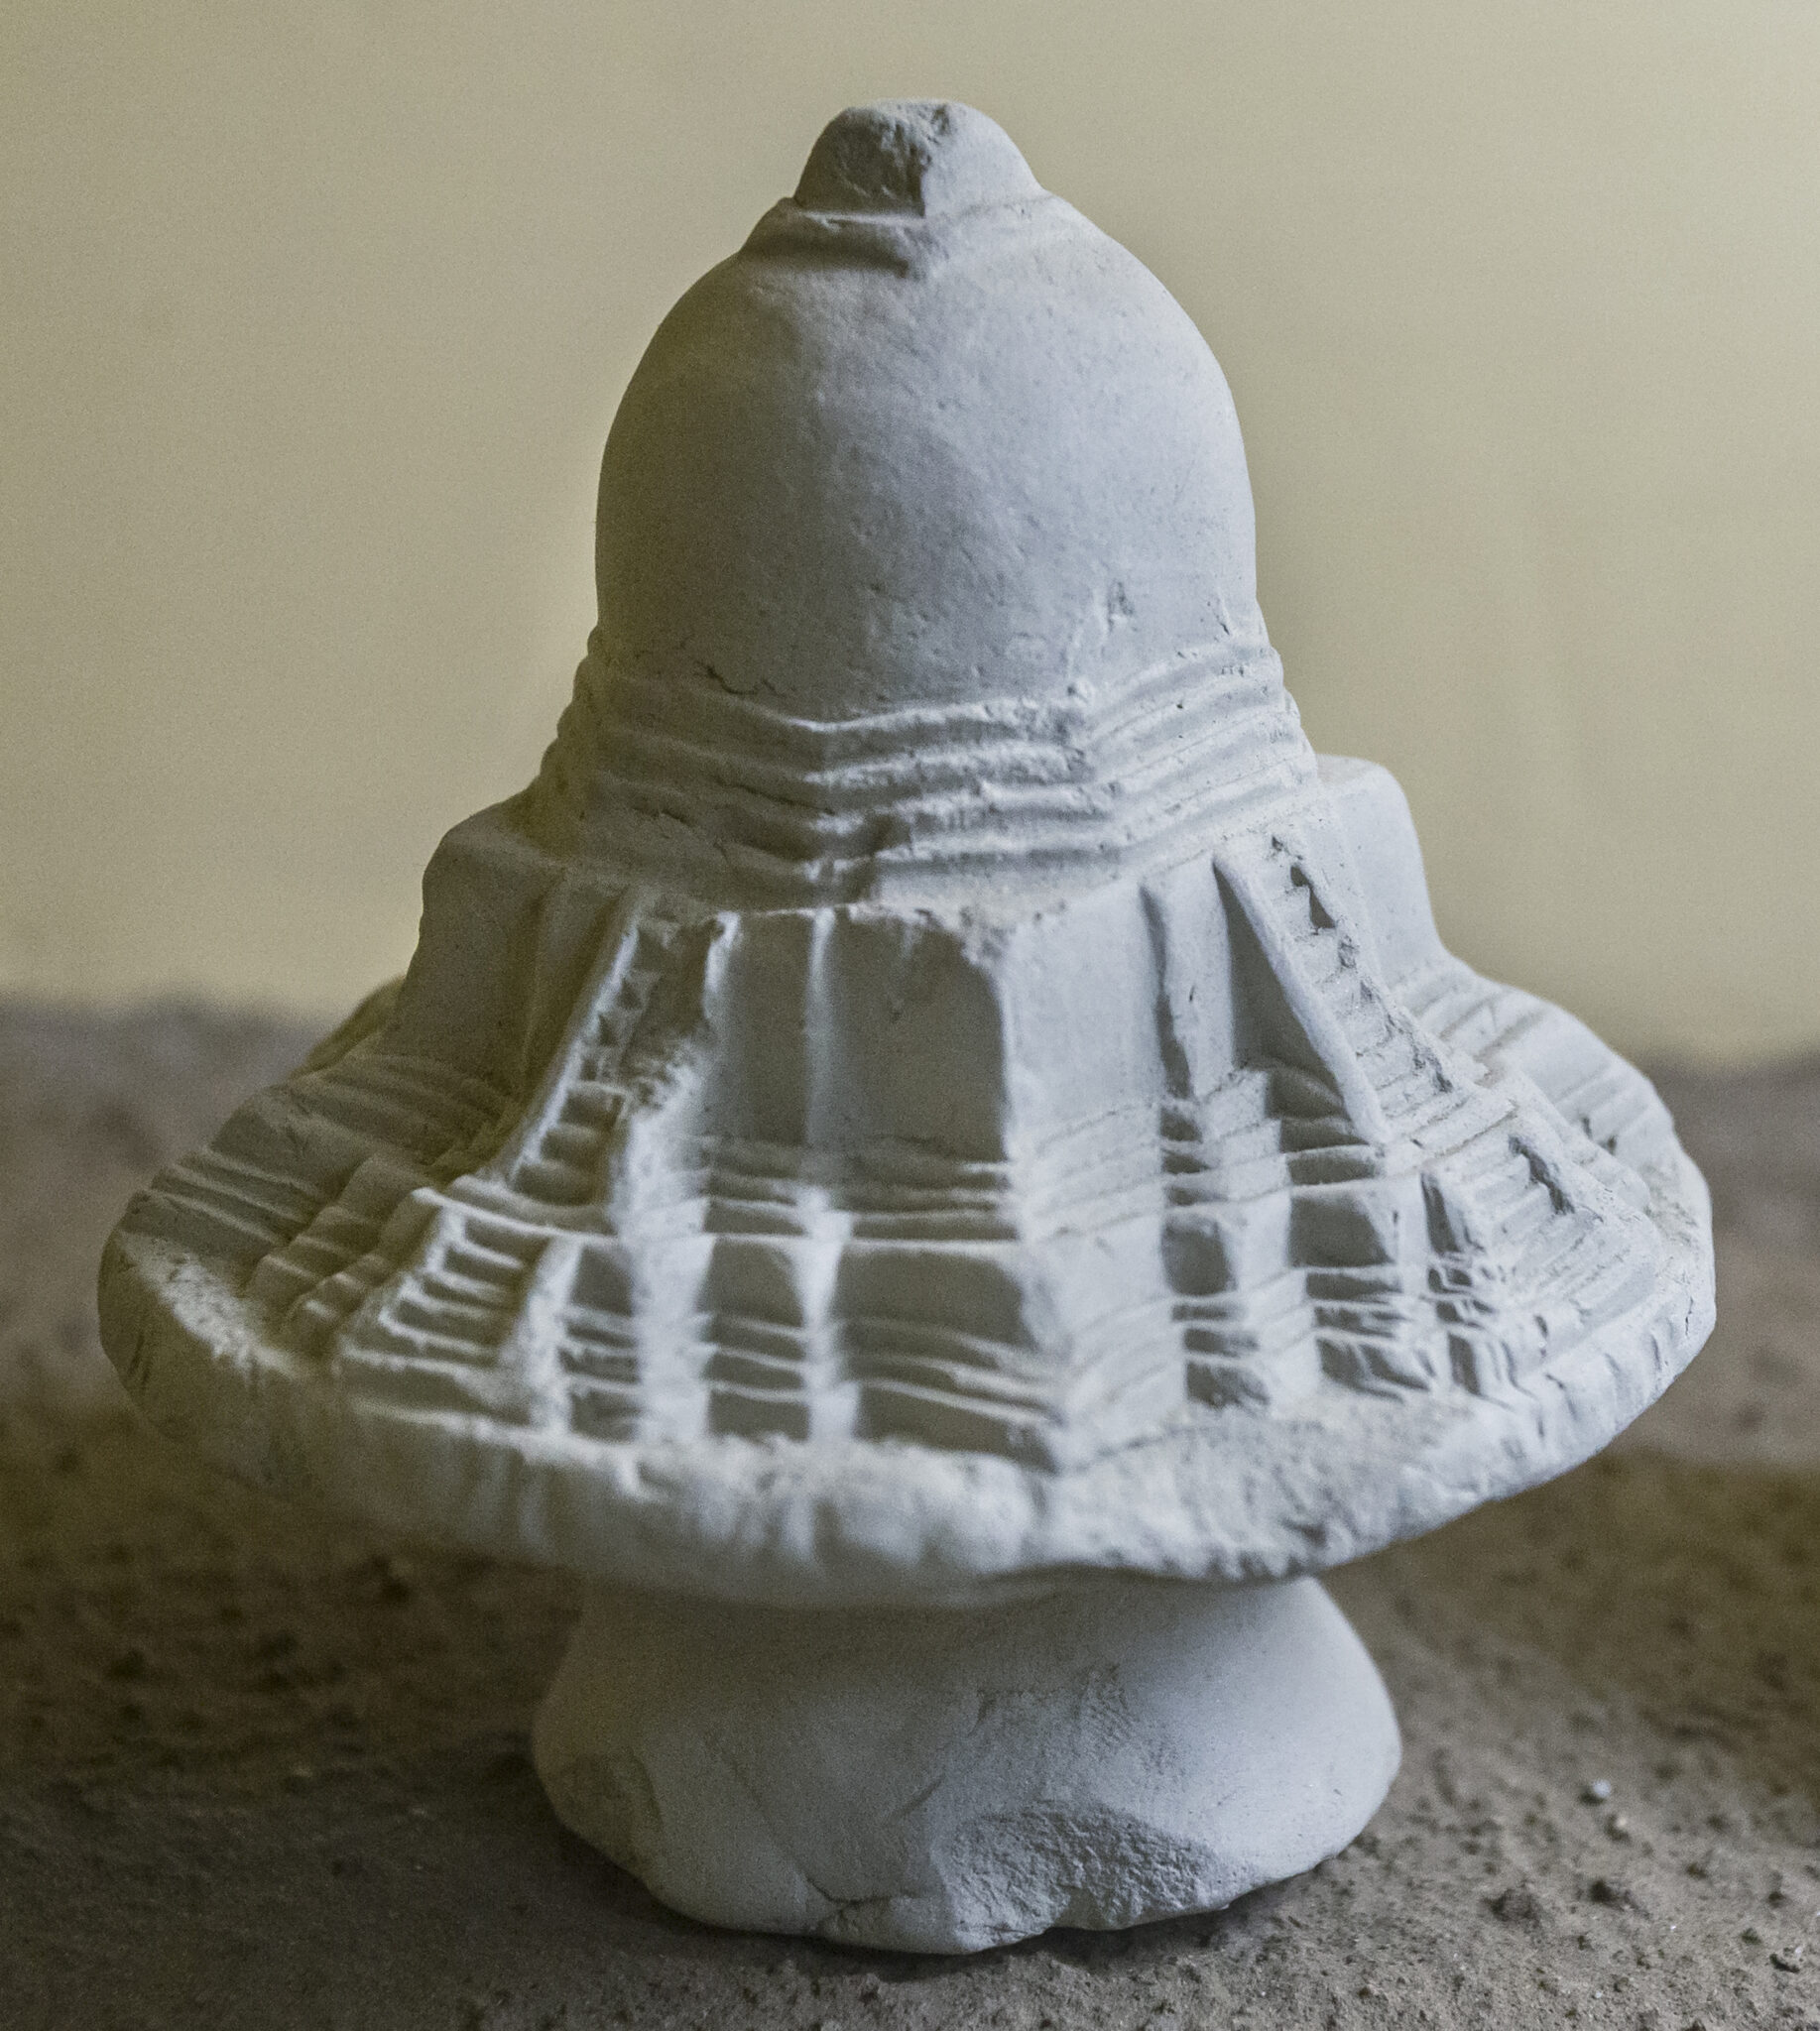 Close view of light-gray earthenware model of stupa featuring clearly demarcated staircases and moldings